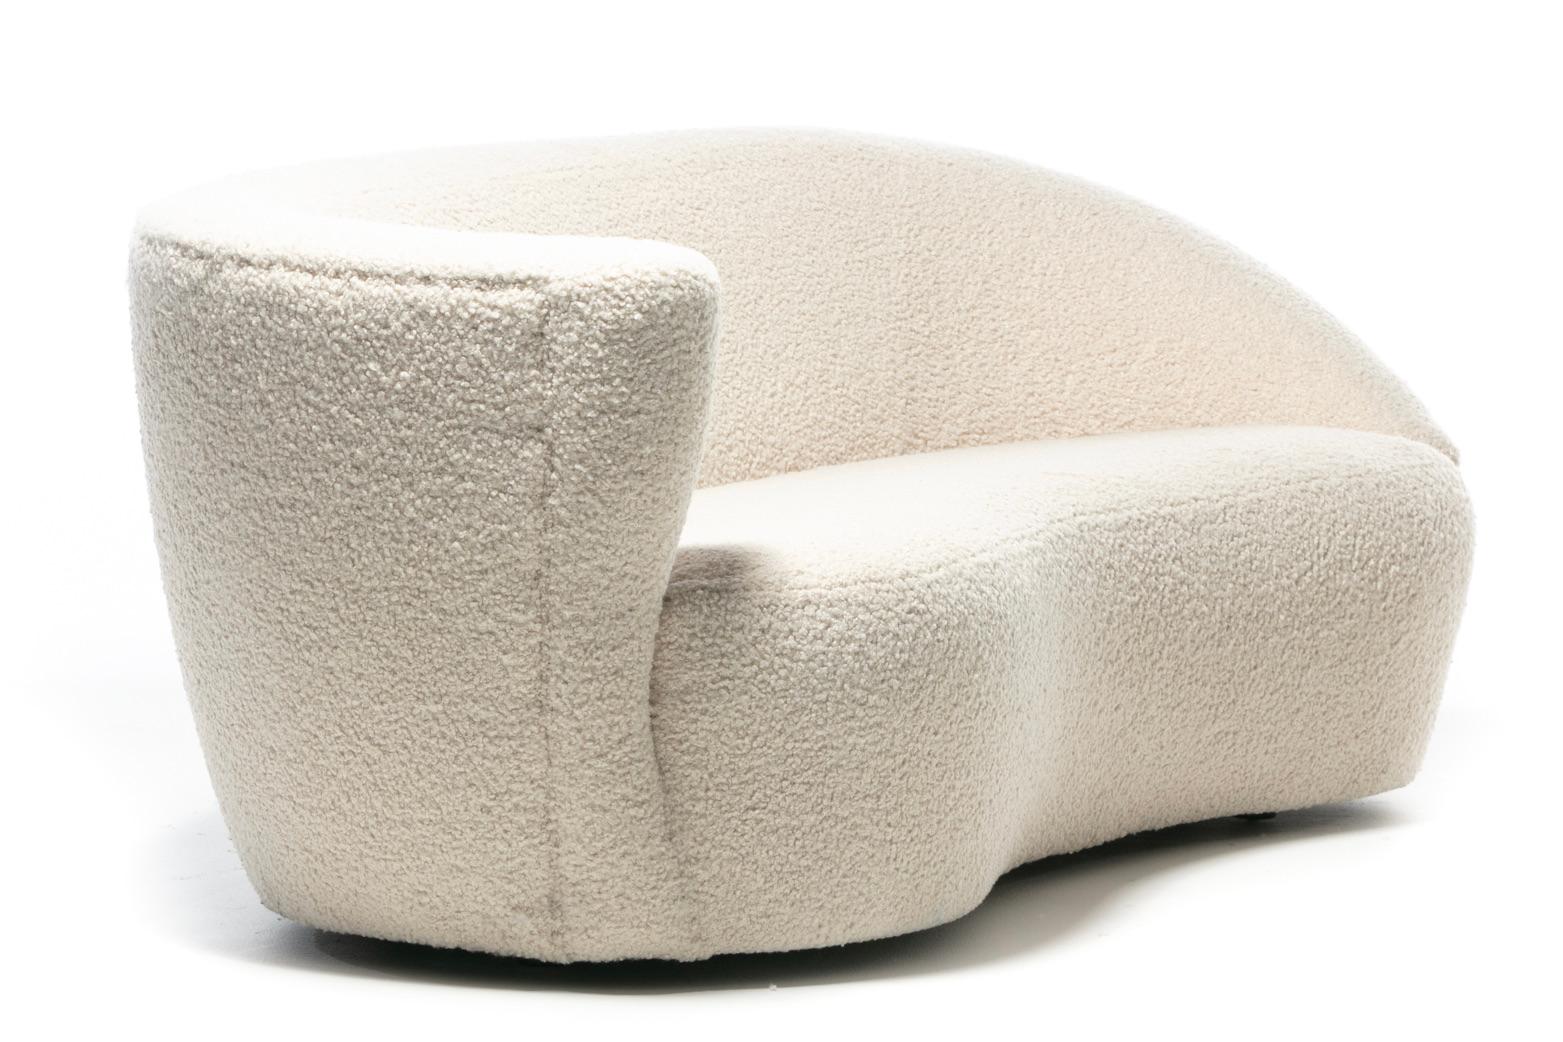 Vladimir Kagan Nautilus Sofa in Ivory White Bouclé by Directional, c. 1990 For Sale 7